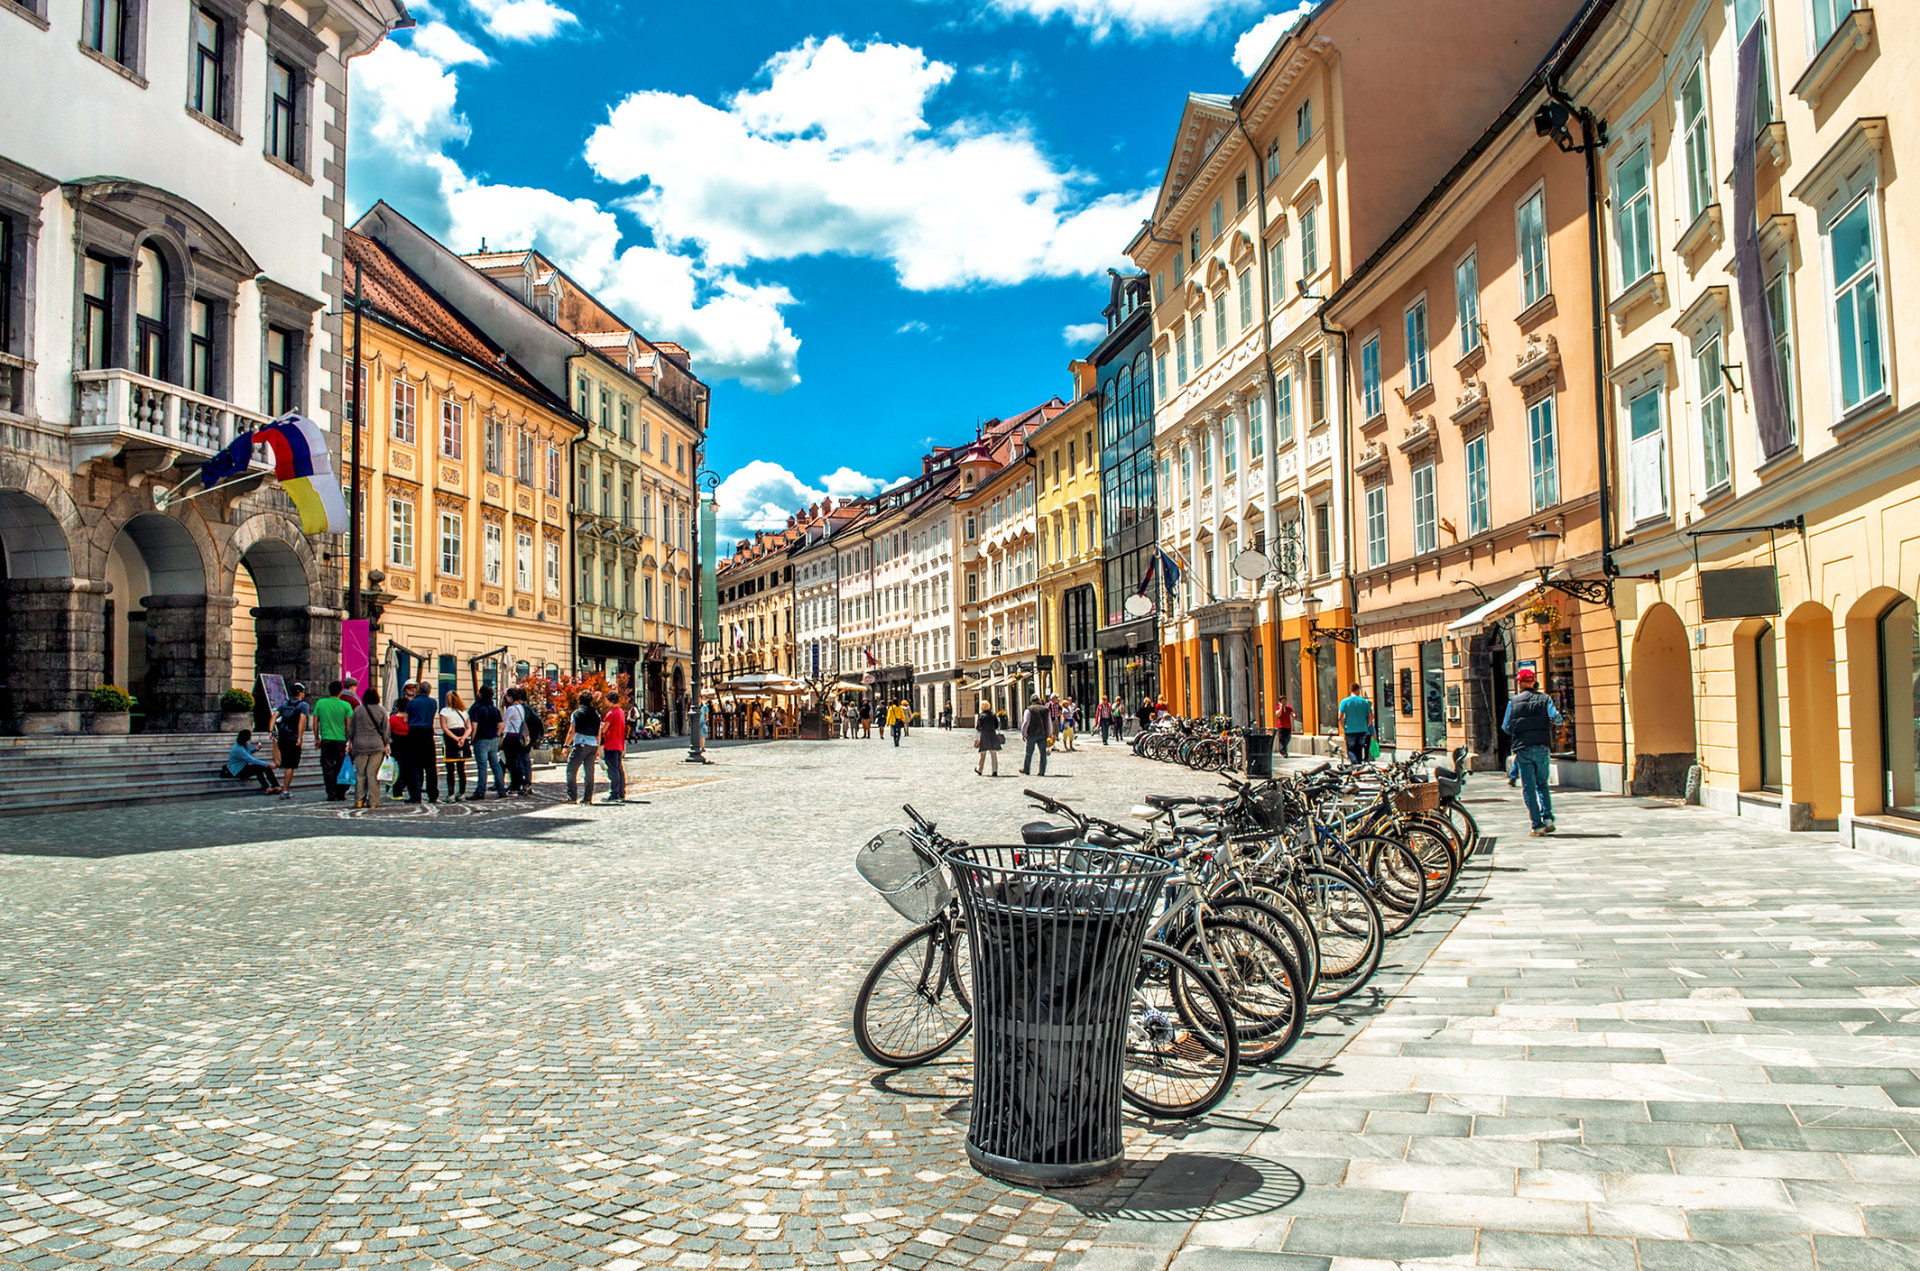 Slovenia's capital boasts of green spaces, open avenues, and charming shops and eateries.<p><a href="https://www.msn.com/en-us/community/channel/vid-7xx8mnucu55yw63we9va2gwr7uihbxwc68fxqp25x6tg4ftibpra?cvid=94631541bc0f4f89bfd59158d696ad7e">Follow us and access great exclusive content every day</a></p>